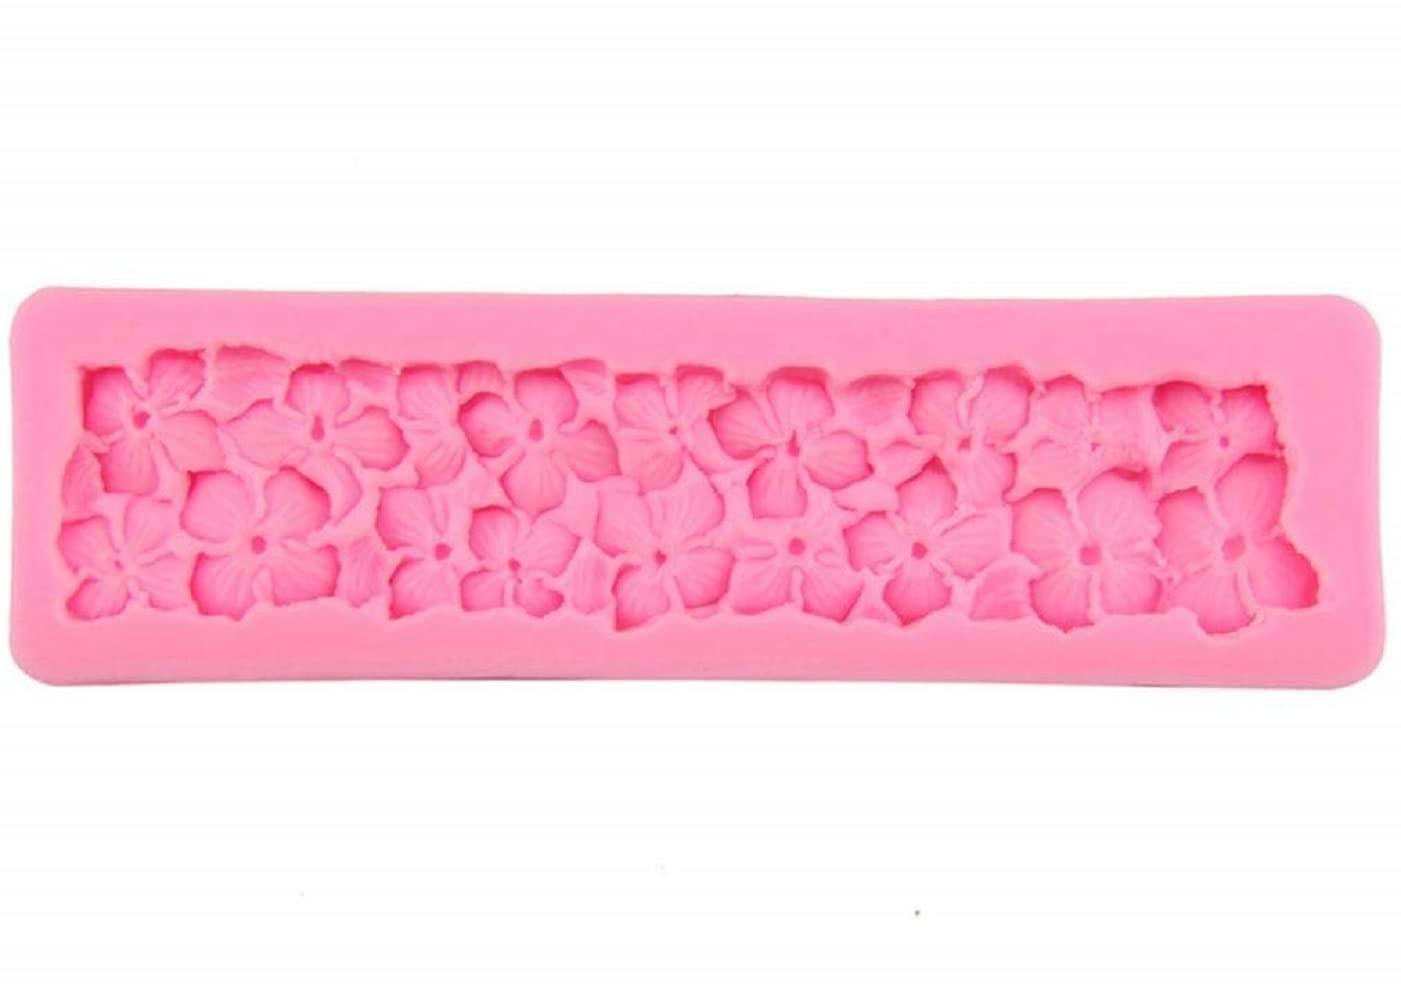 Buy MoldBerry Silicone Origami Wave Design Sheet Mould for Cake Decorating  Tools Fondant Garnishing Sheet Moulds for Cake Making Wave (Pack of - 1)  Online at Low Prices in India - Amazon.in